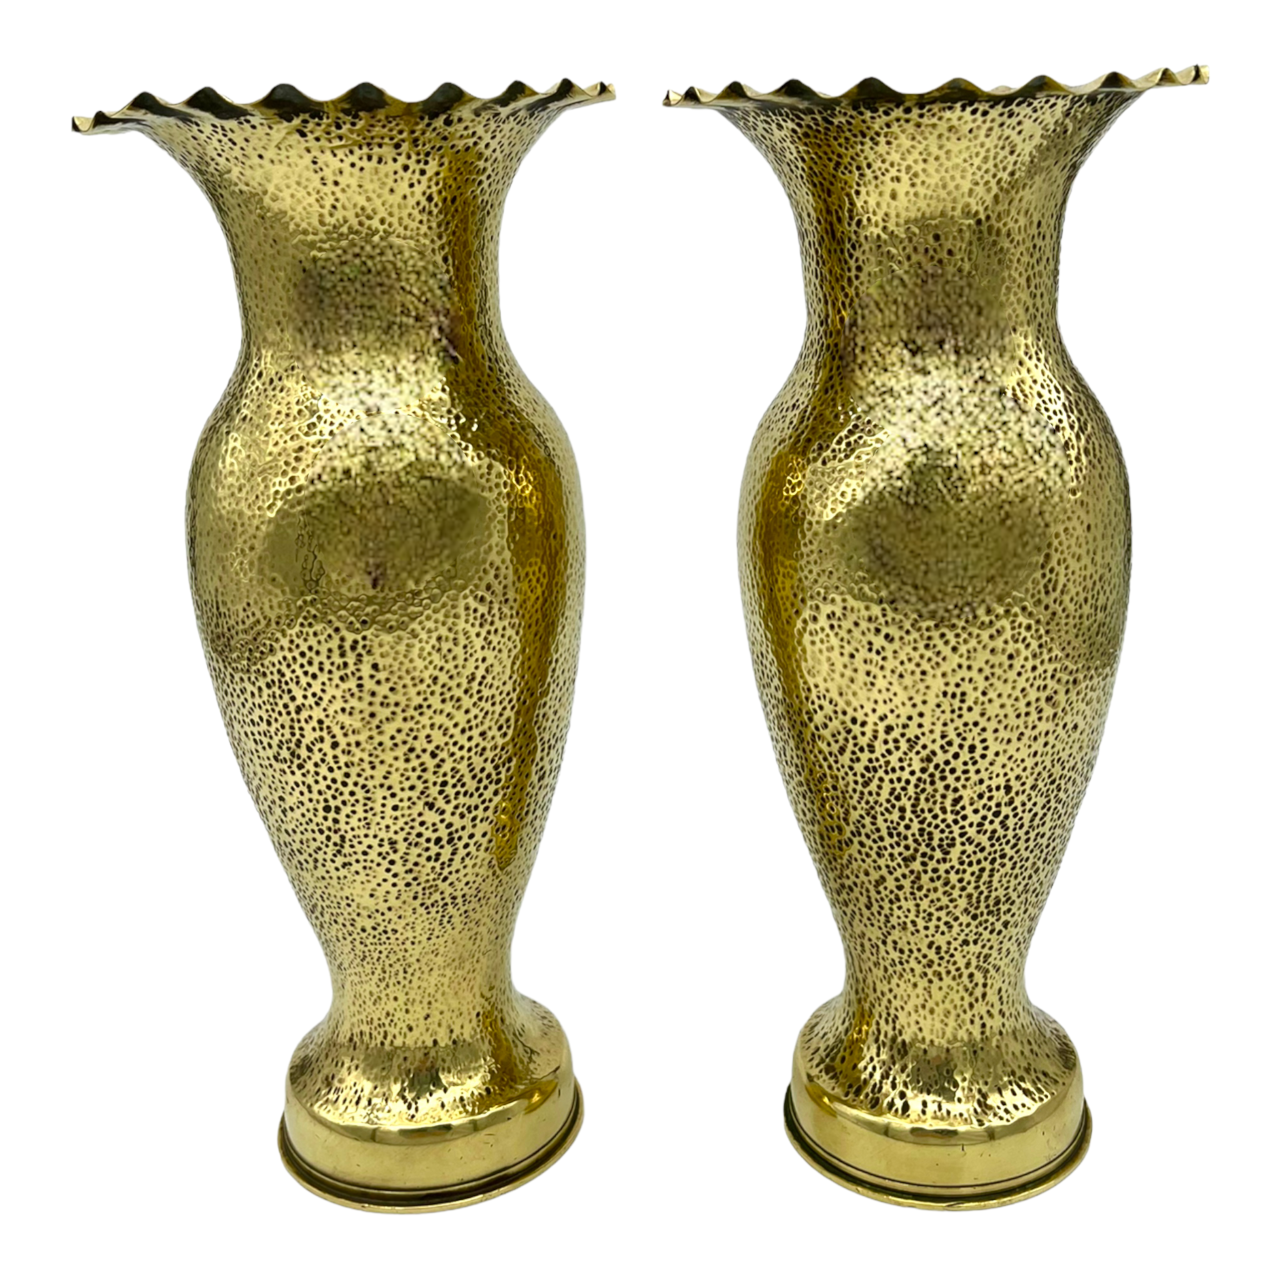 French WW1 brass trench art shell case vases sold by All Things French Store